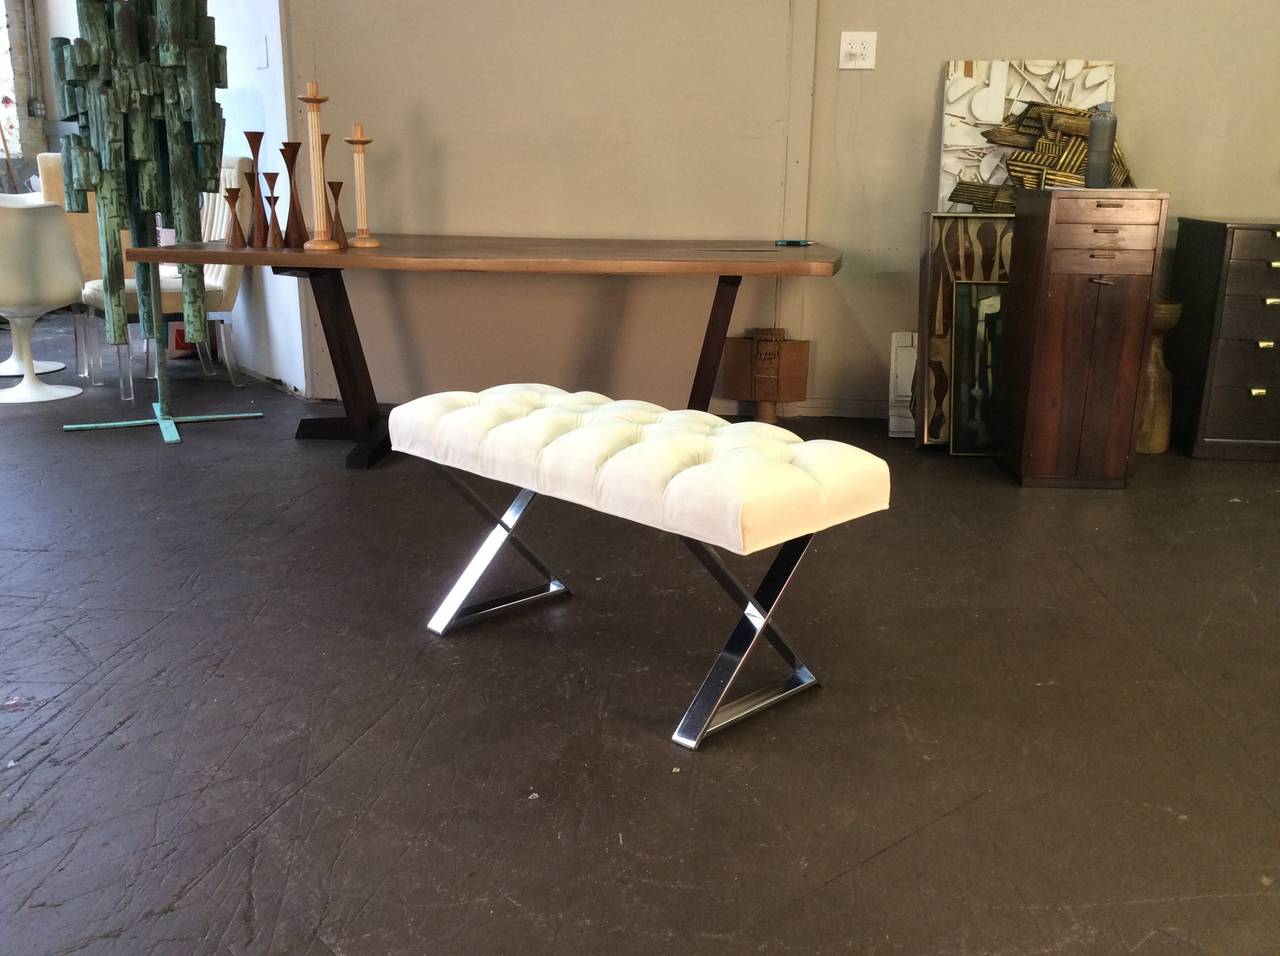 Gorgeous X-based chrome bench in tufted white velvet upholstery by Milo Baughman for Thayer Coggin. This piece is heavy and very well made. Chrome is in excellent vintage condition with less than average wear for age and use. The upholstery is new.